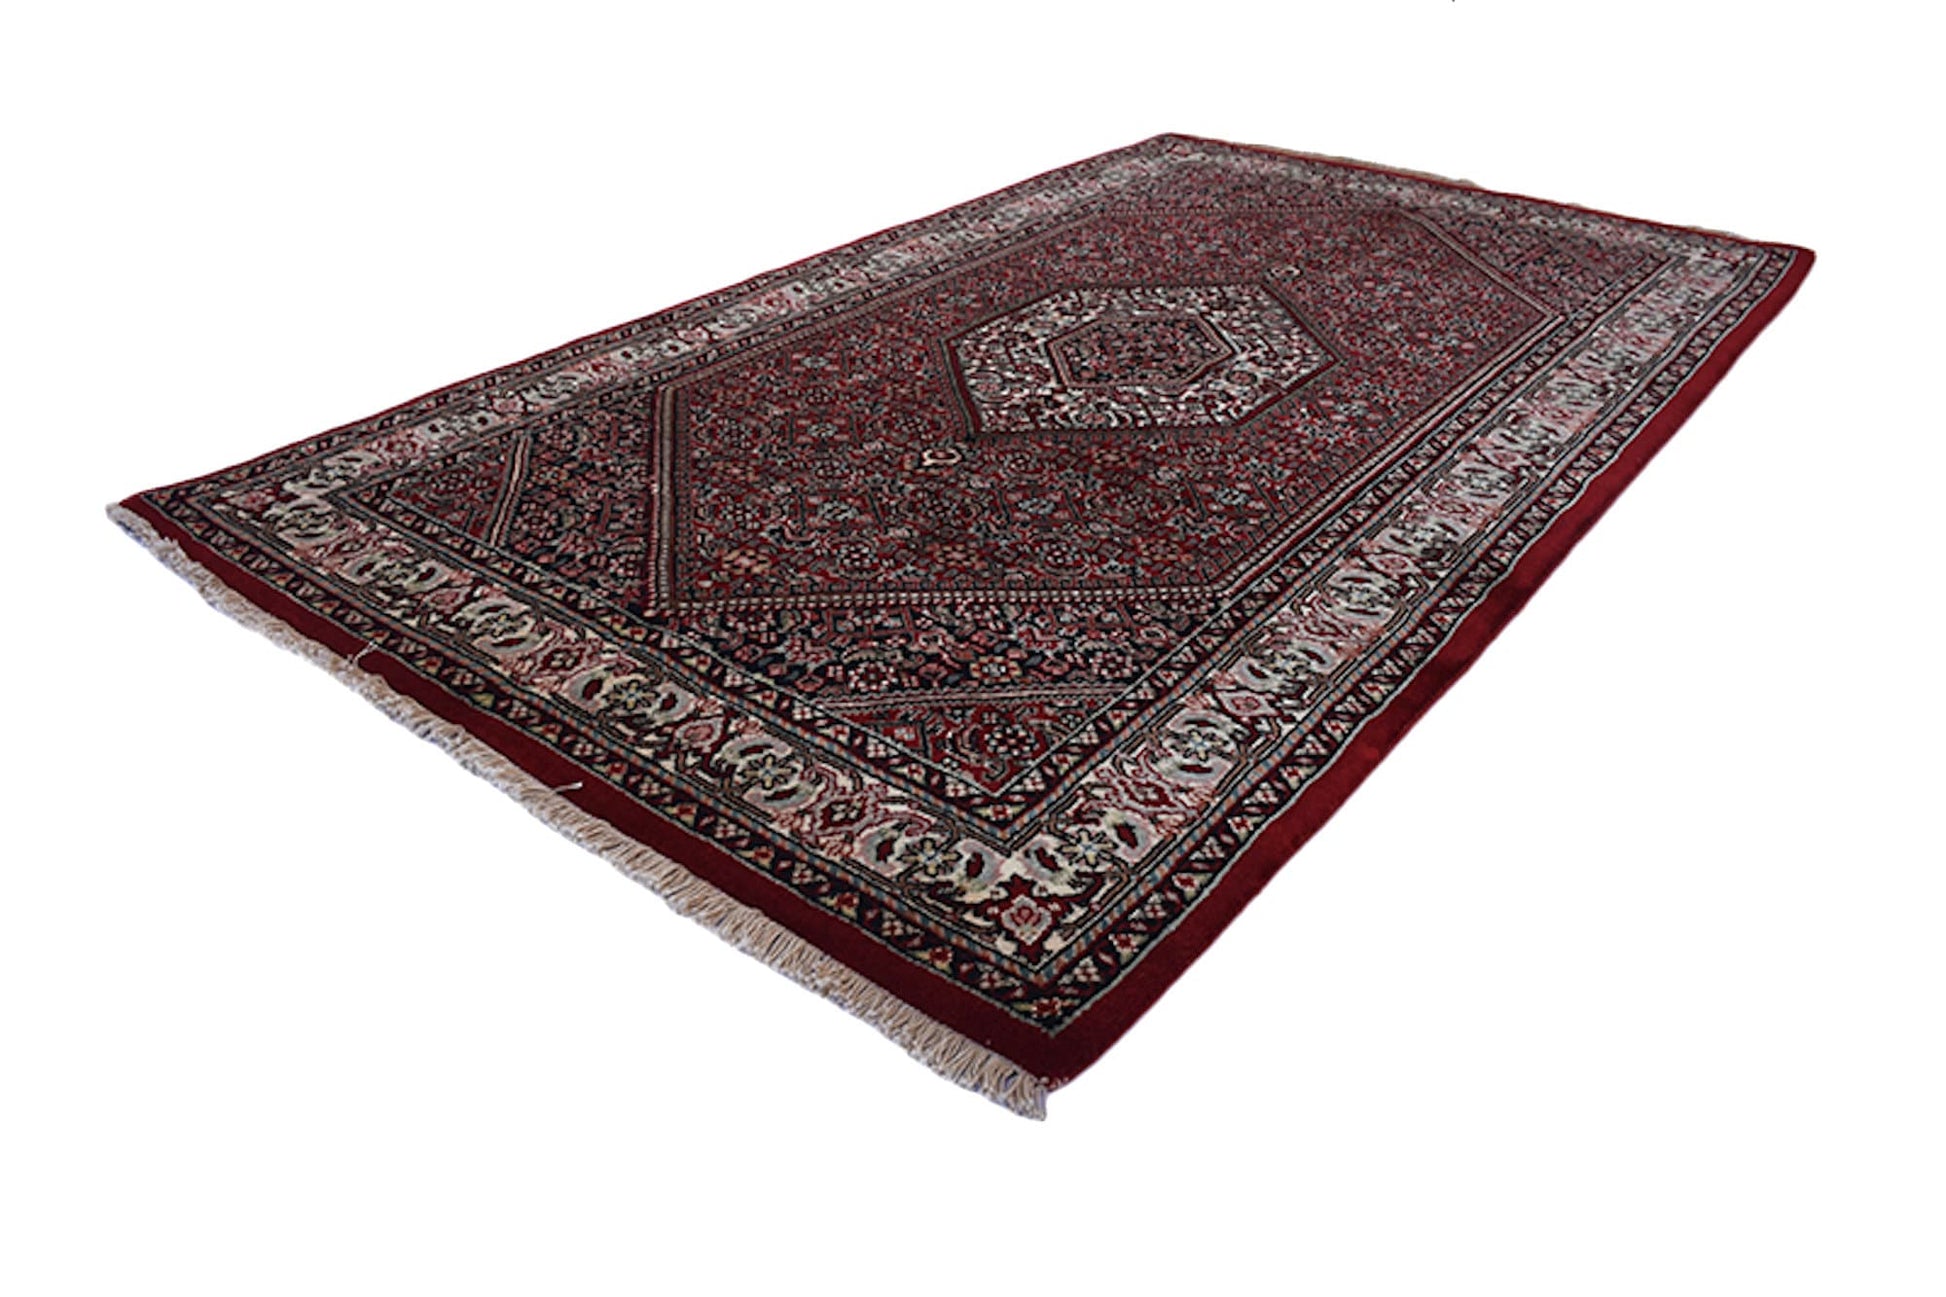 Dark Colored Antique Oriental Rug | Small Kitchen Floor Rug | Dark Red & Pink | Traditional Floral Area Rug Handmade with Wool